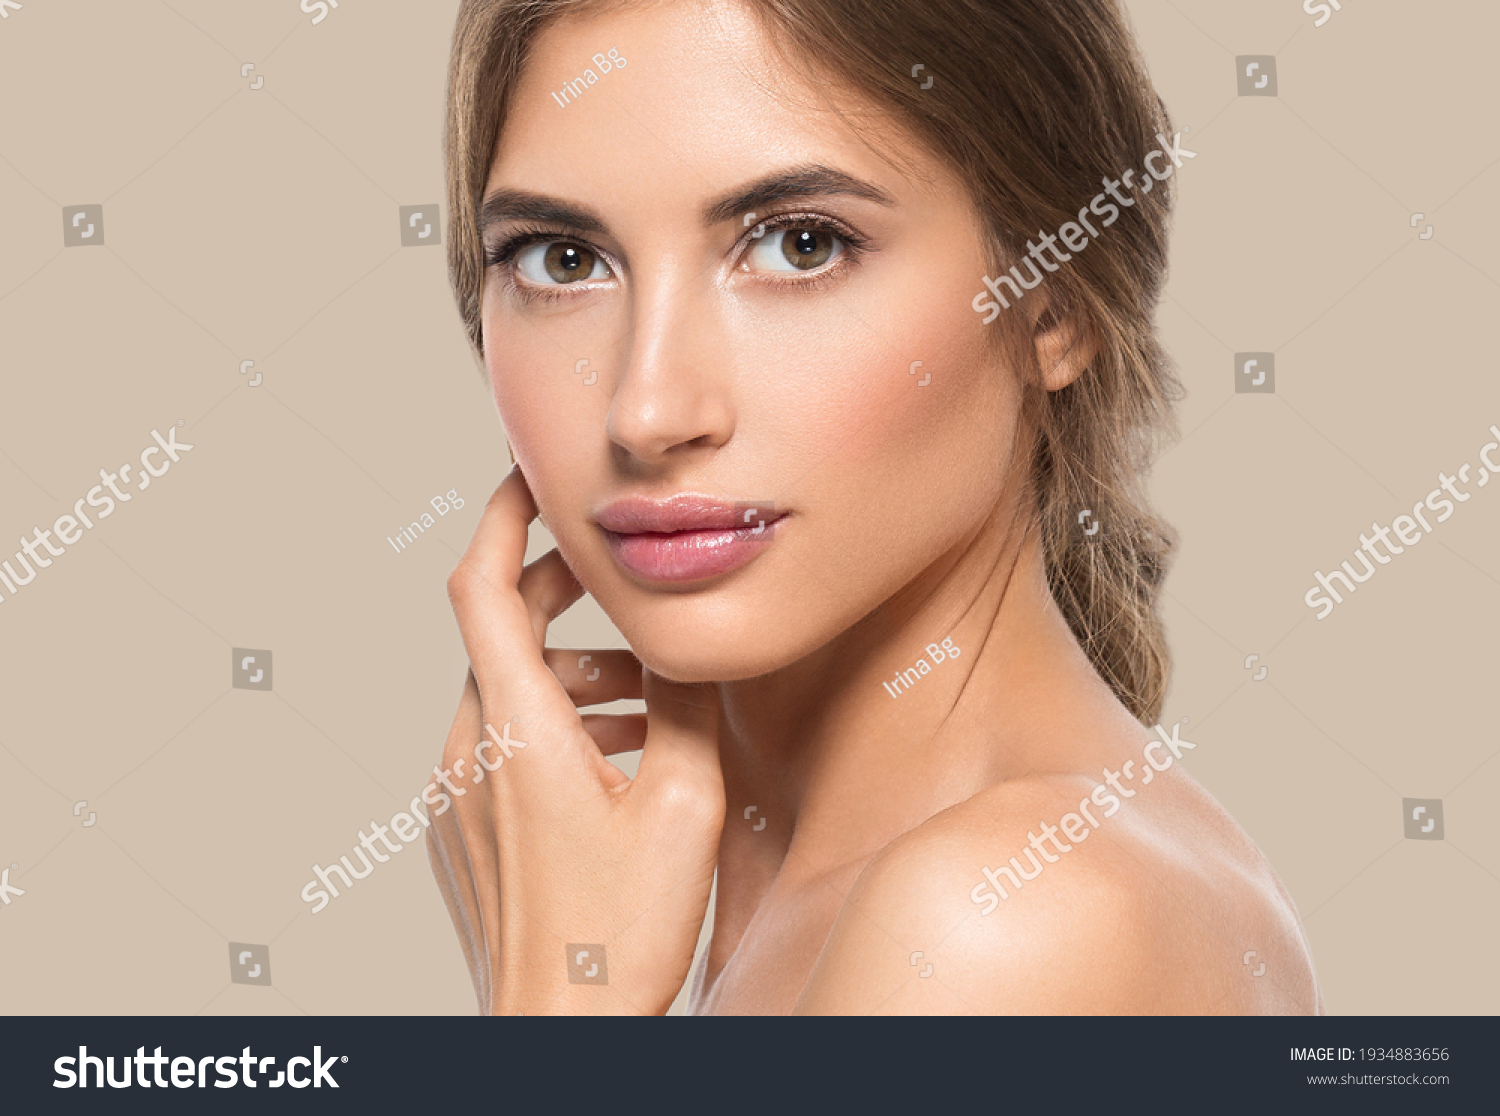 Woman beautiful face healthy skin care natural beauty young model #1934883656